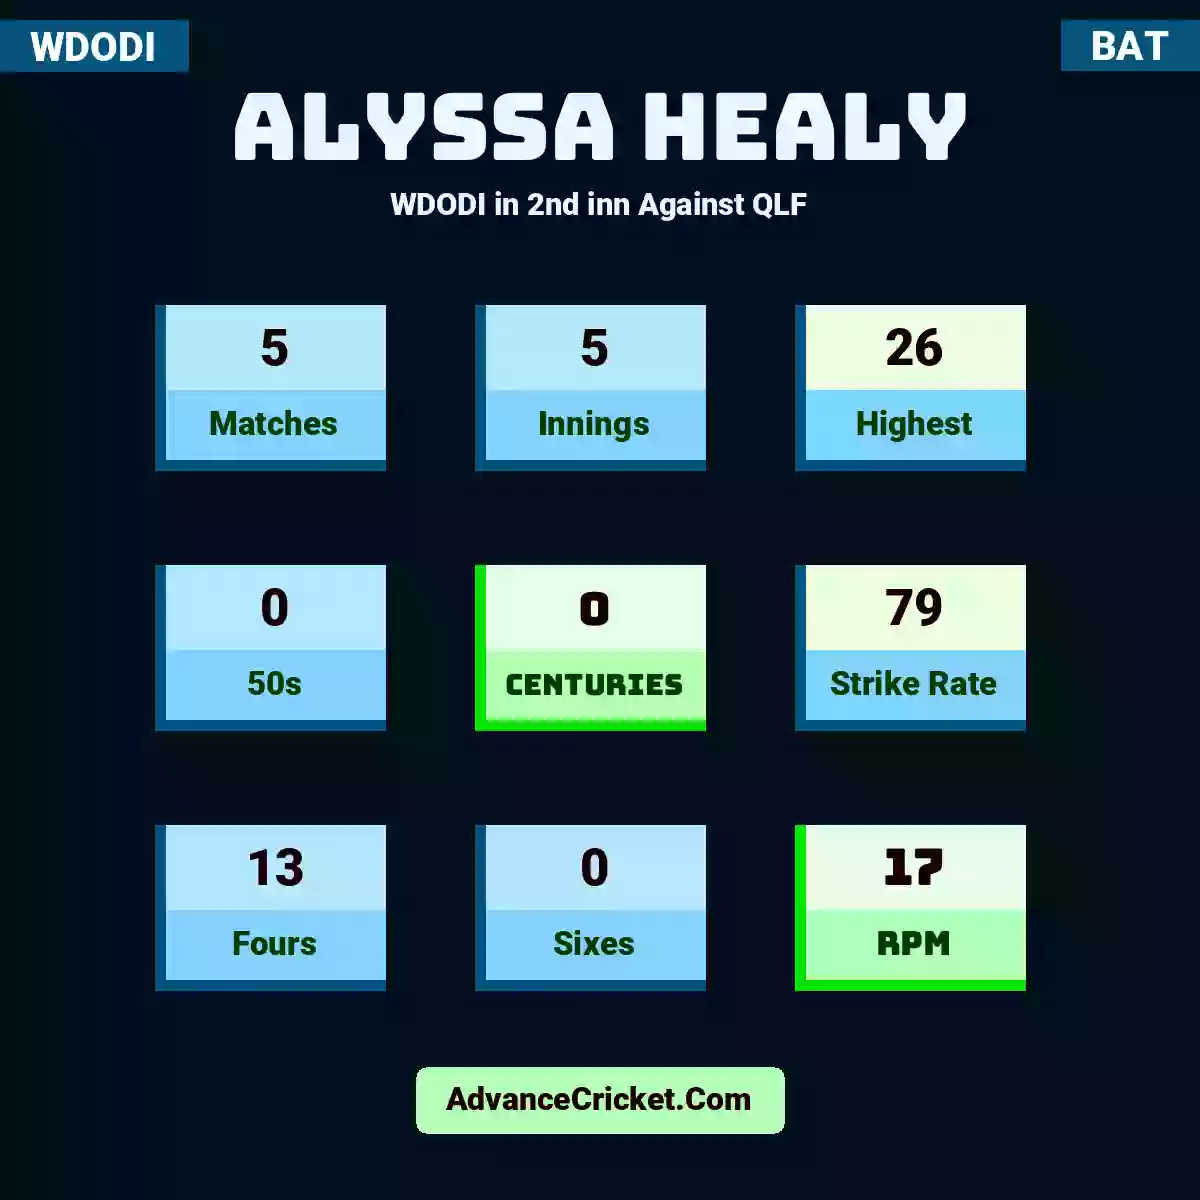 Alyssa Healy WDODI  in 2nd inn Against QLF, Alyssa Healy played 5 matches, scored 26 runs as highest, 0 half-centuries, and 0 centuries, with a strike rate of 79. A.Healy hit 13 fours and 0 sixes, with an RPM of 17.